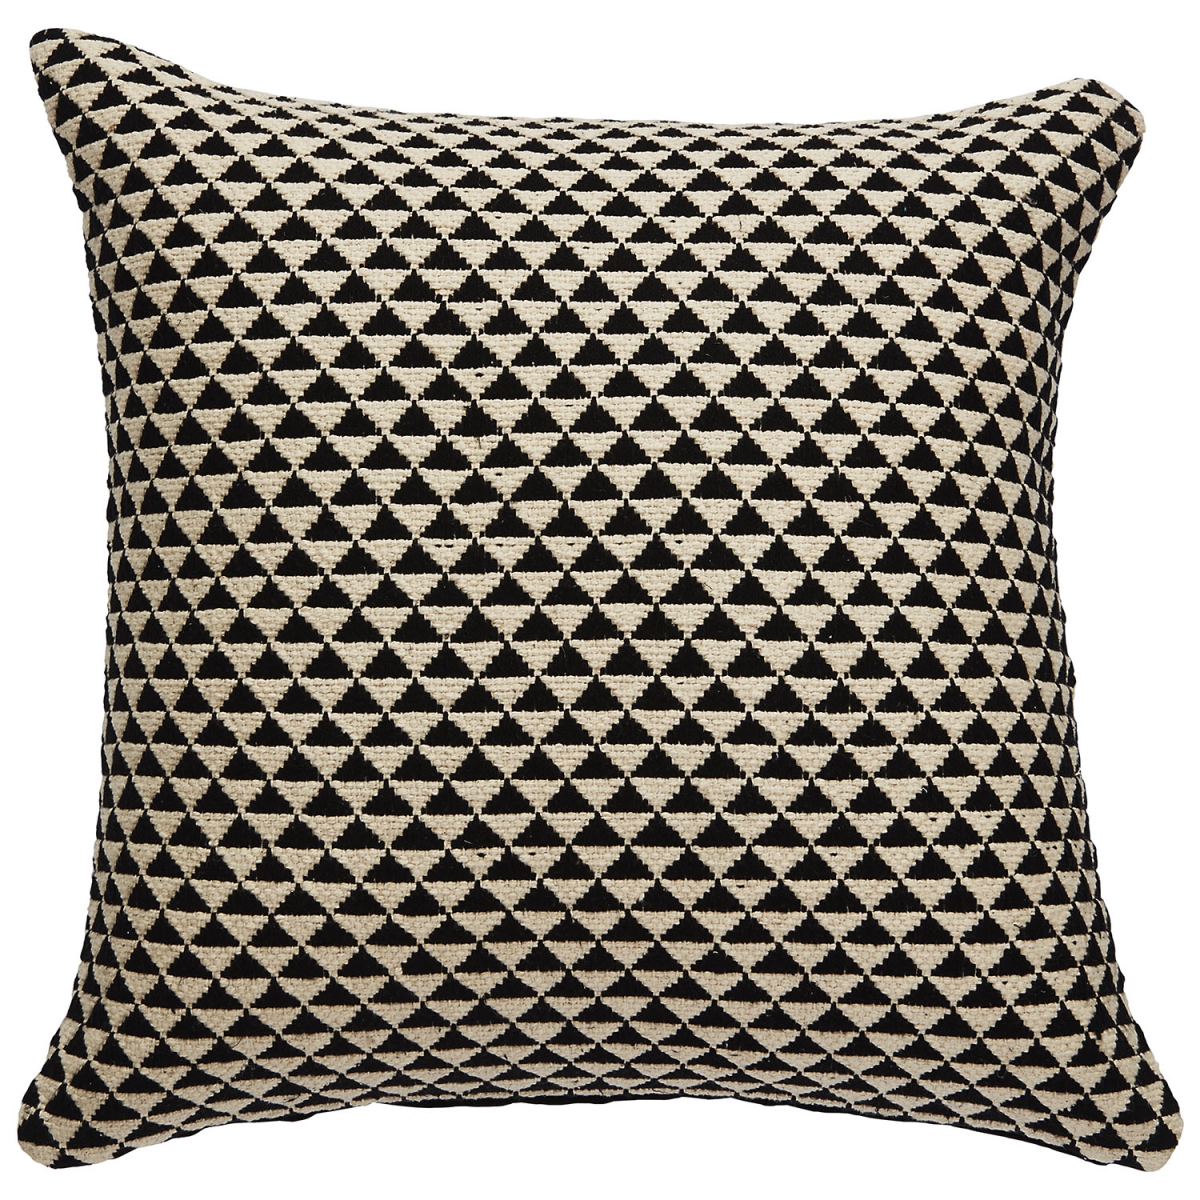 Plc101615-p National Geographic Home Collection Ng-24 Design Square Pillow, Caviar - 20 X 20 In.